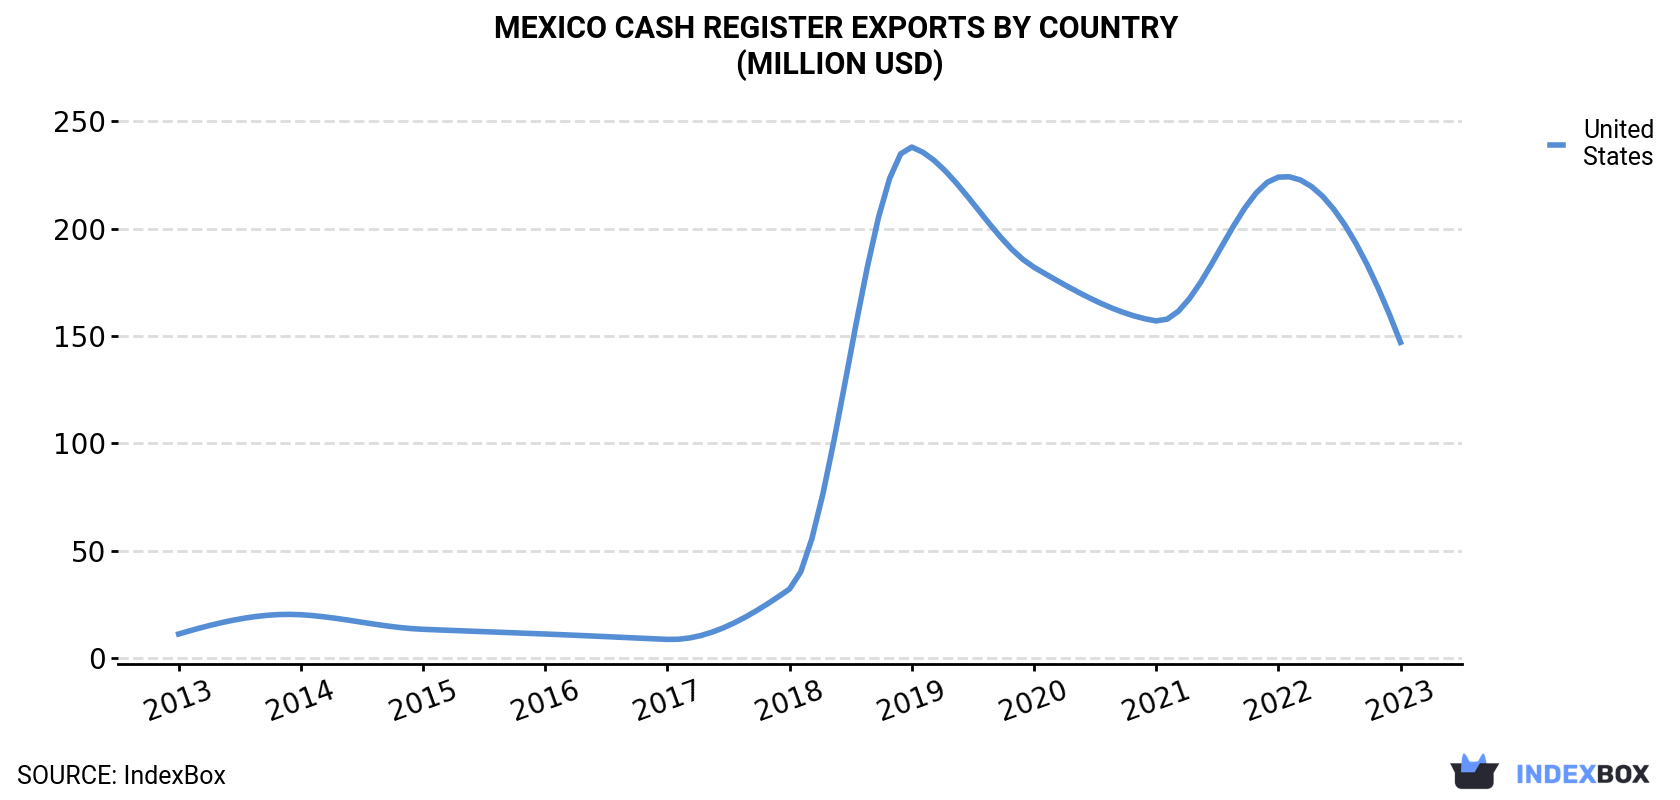 Mexico Cash Register Exports By Country (Million USD)